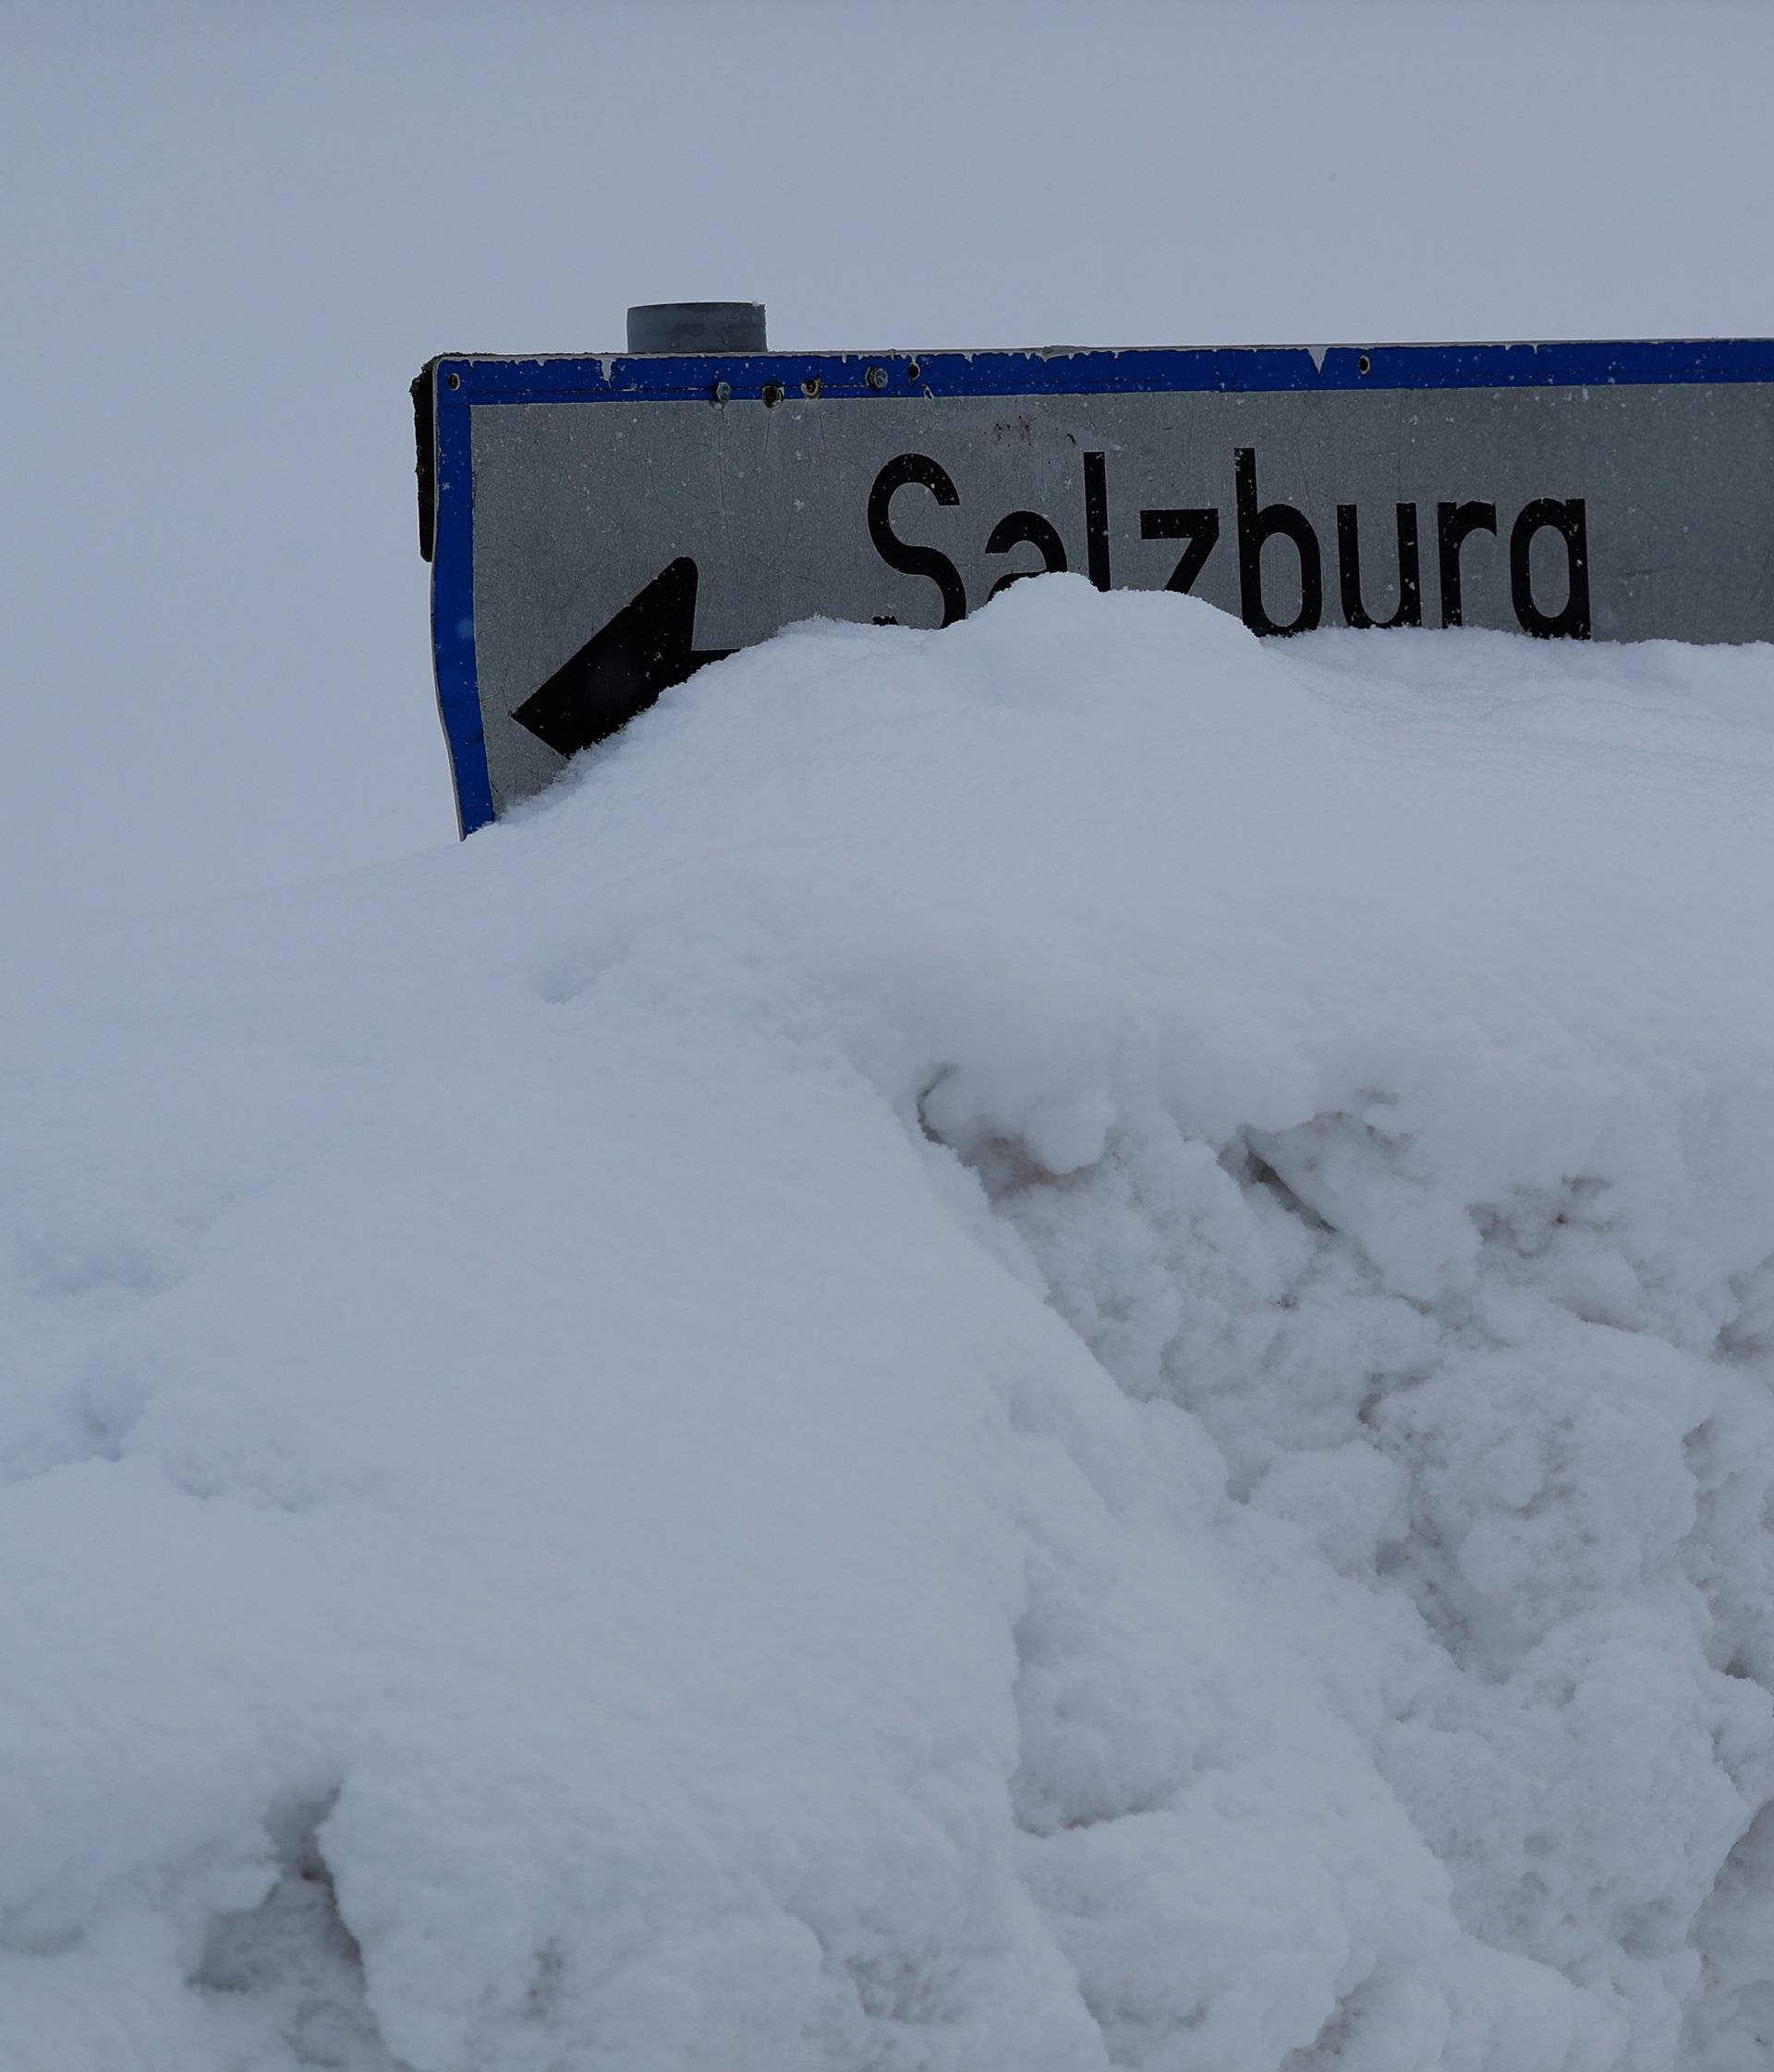 A street sign is covered in snow on an icy road in Knoppen